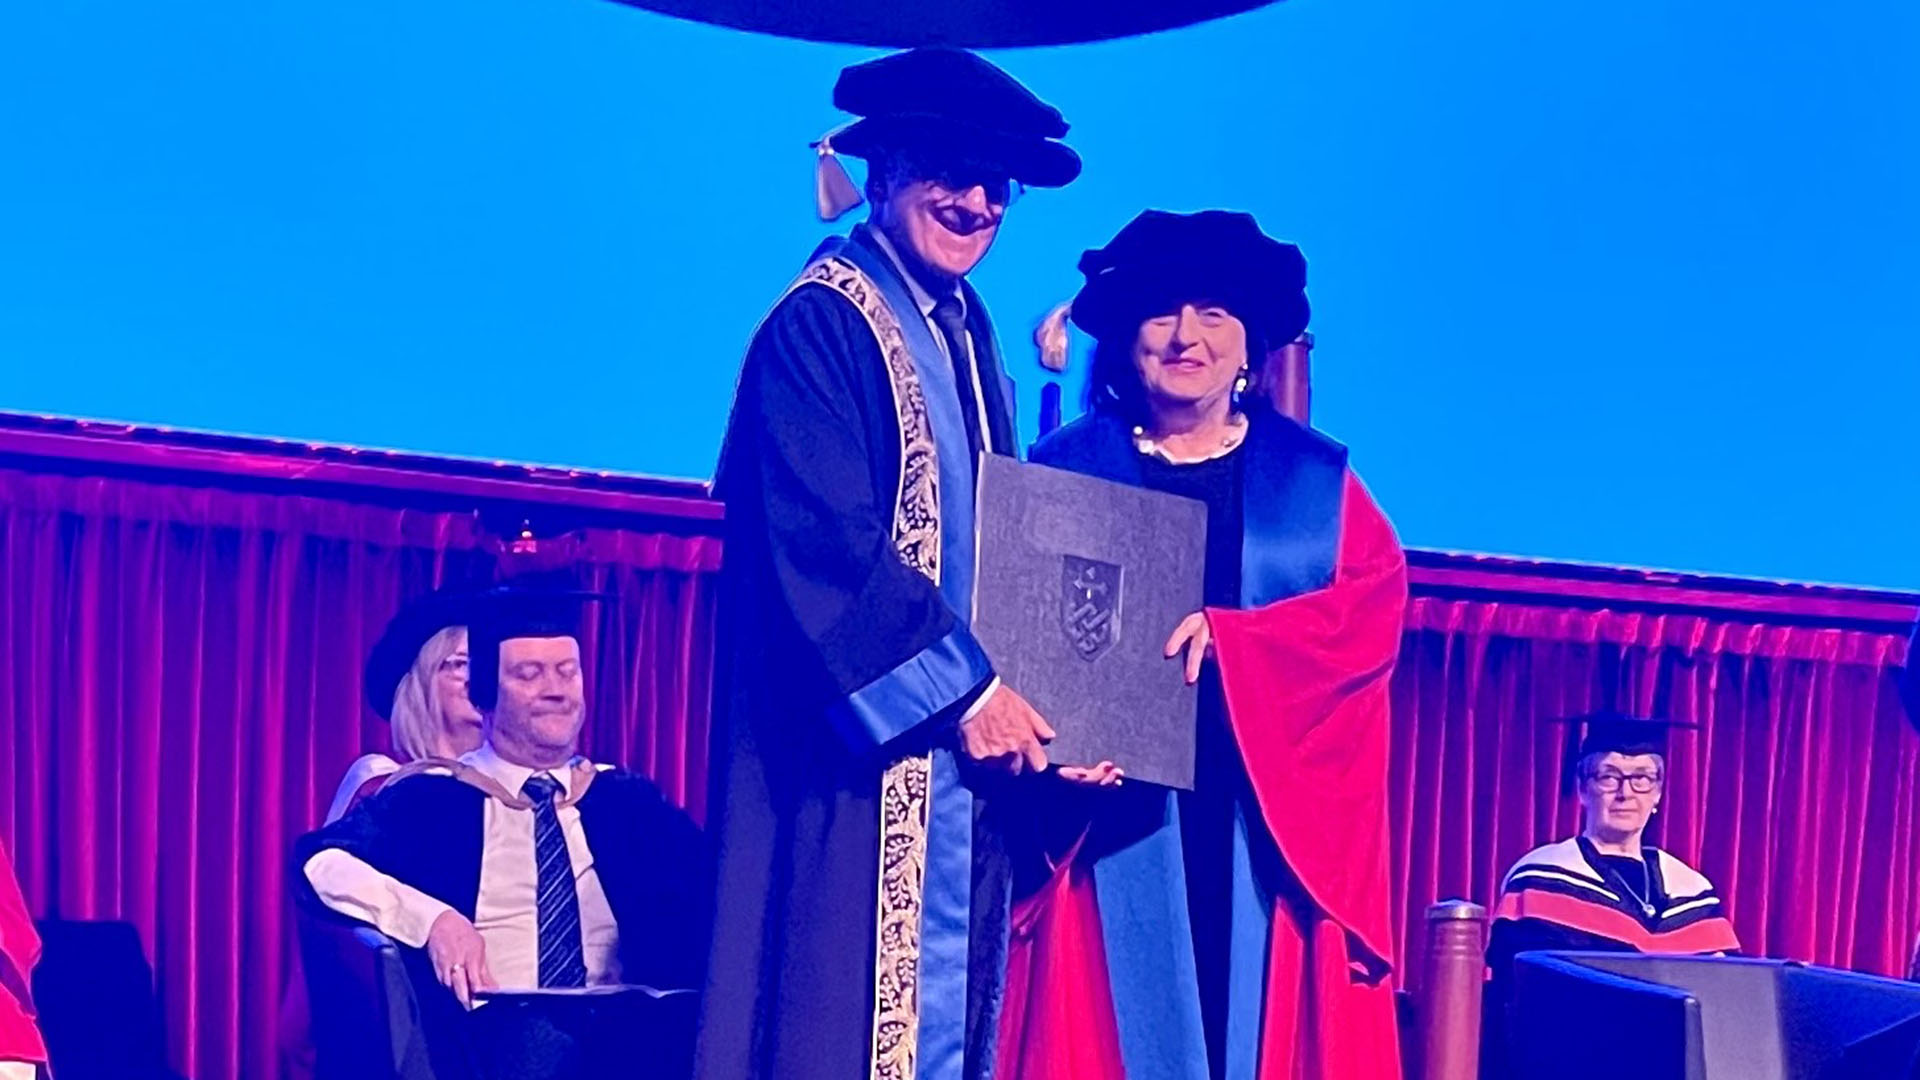 UOW Vice-Chancellor Patricia M. Davidson receives an with an Honorary Doctorate of Health Sciences by the University of Technology